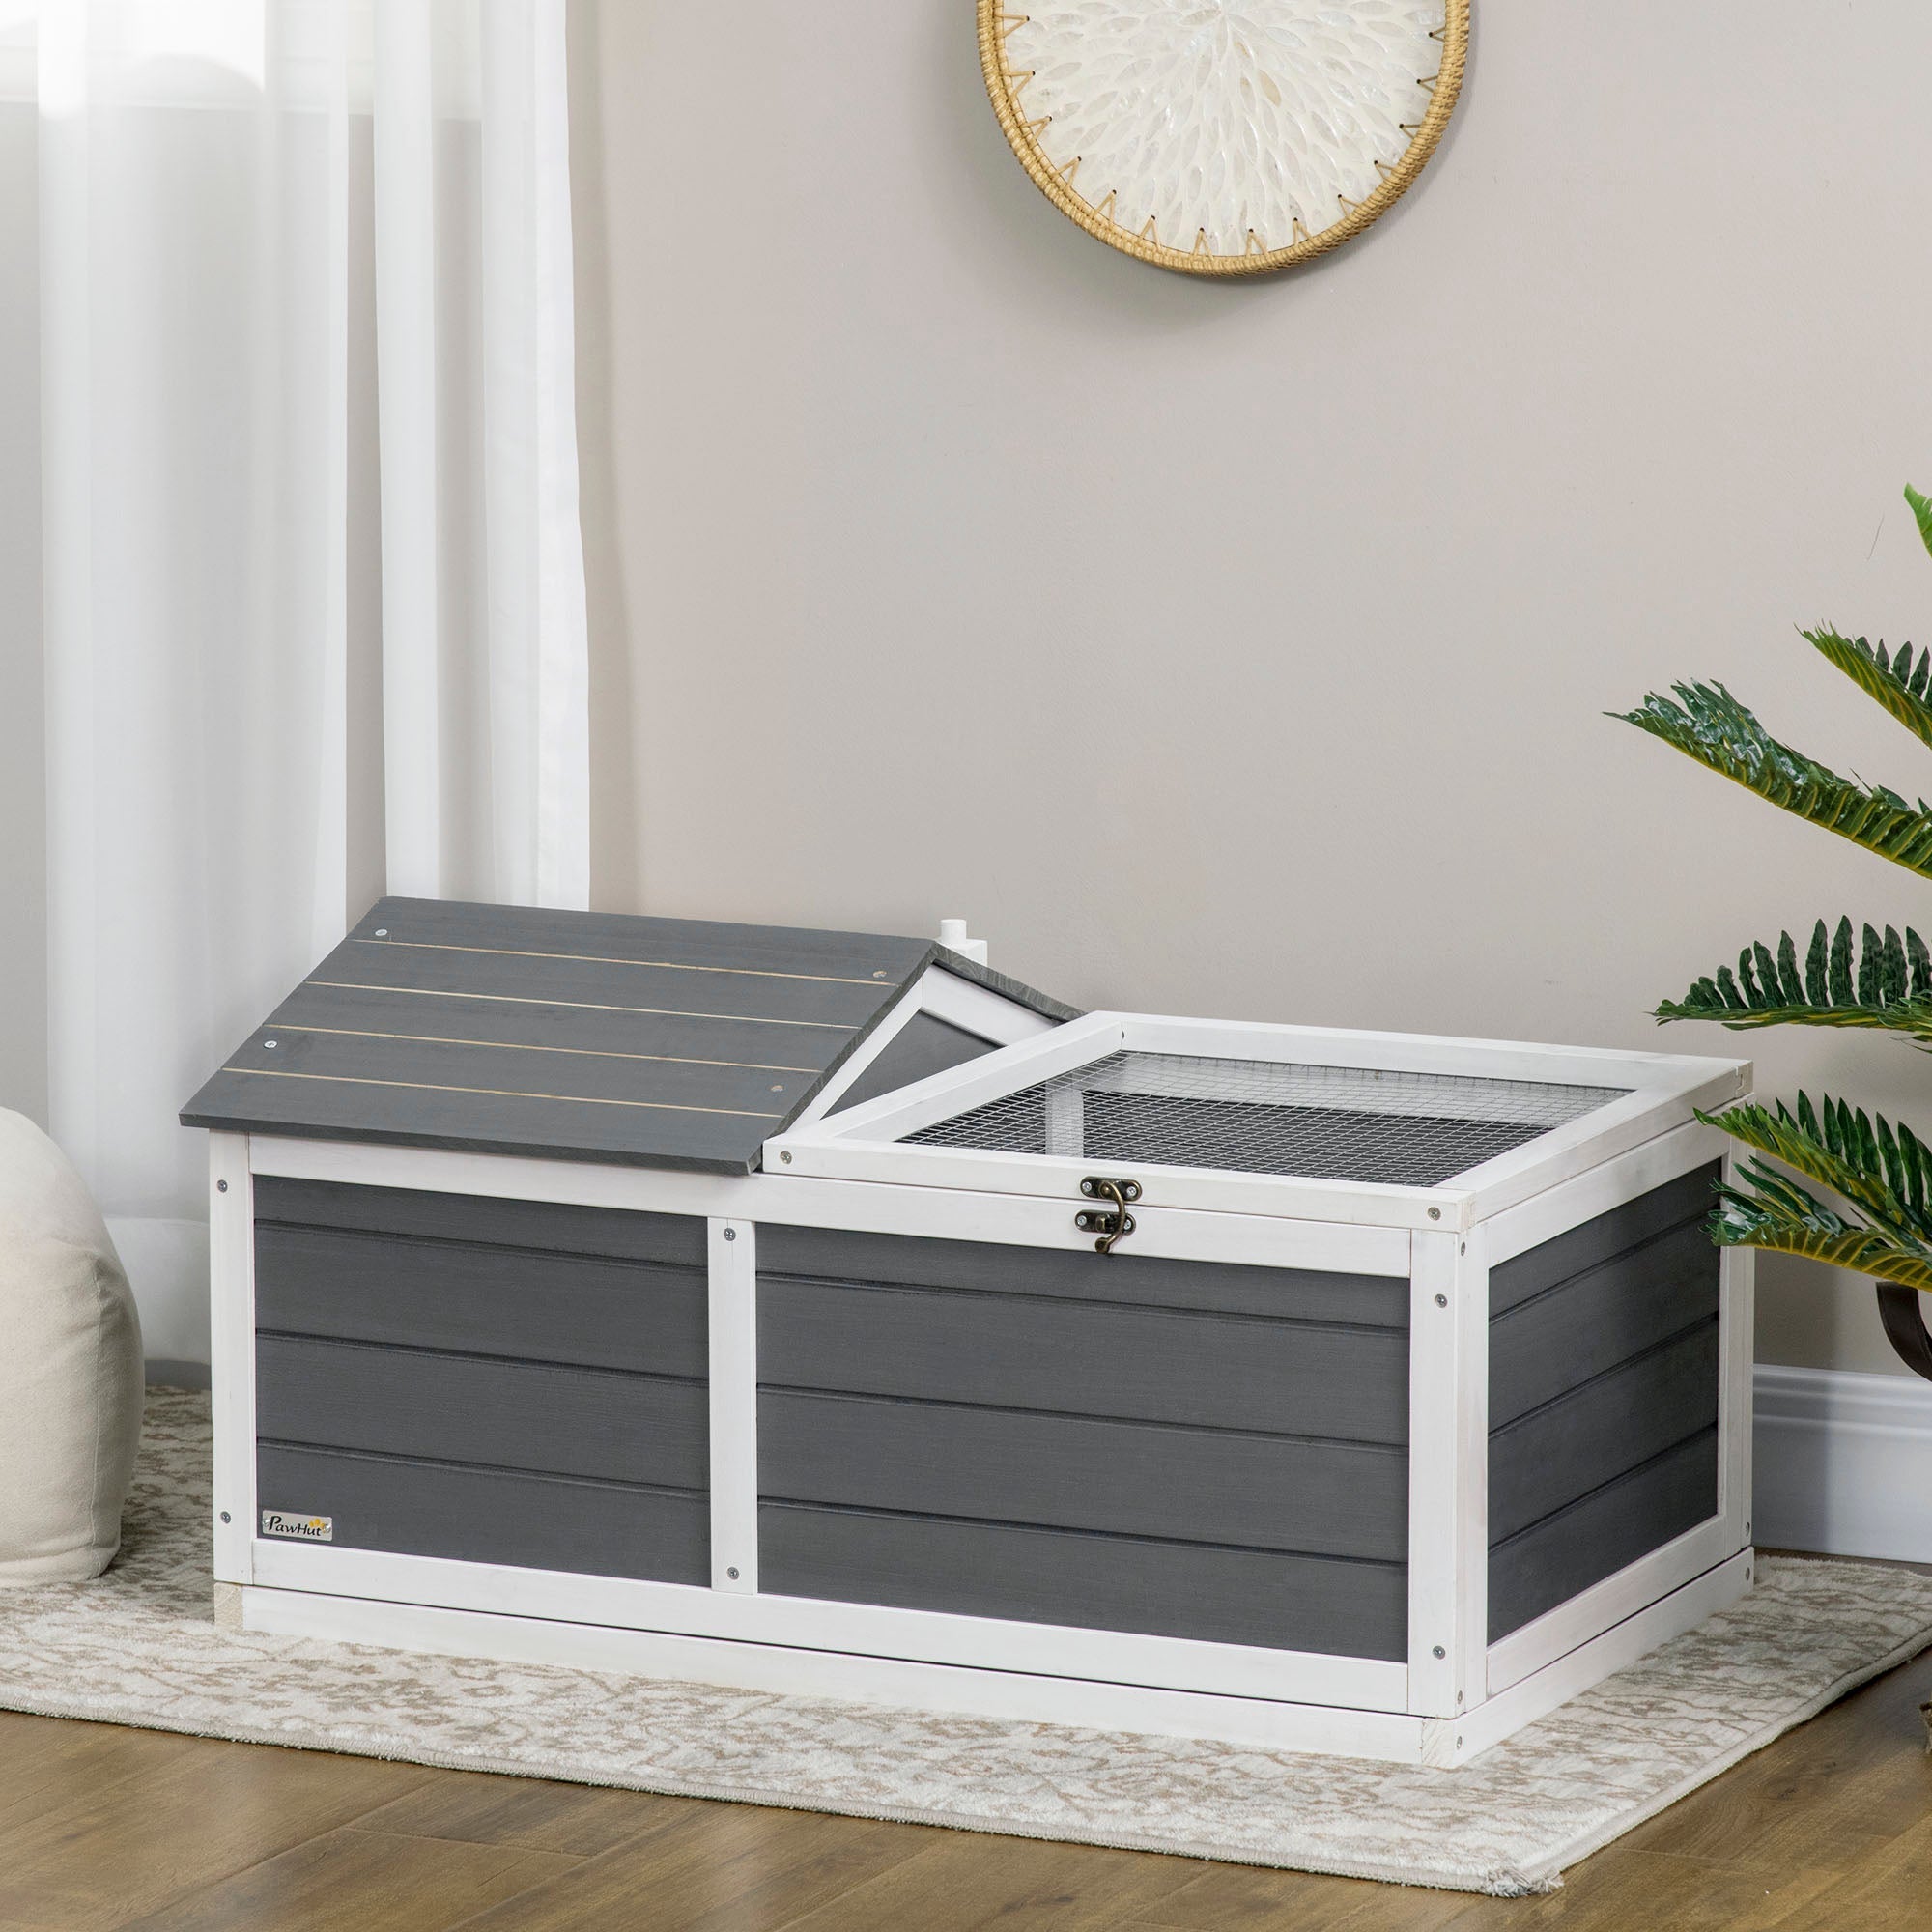 Wooden Tortoise House, Small Pet Reptile Shelter, with Hide Den and Run - Grey, PawHut,